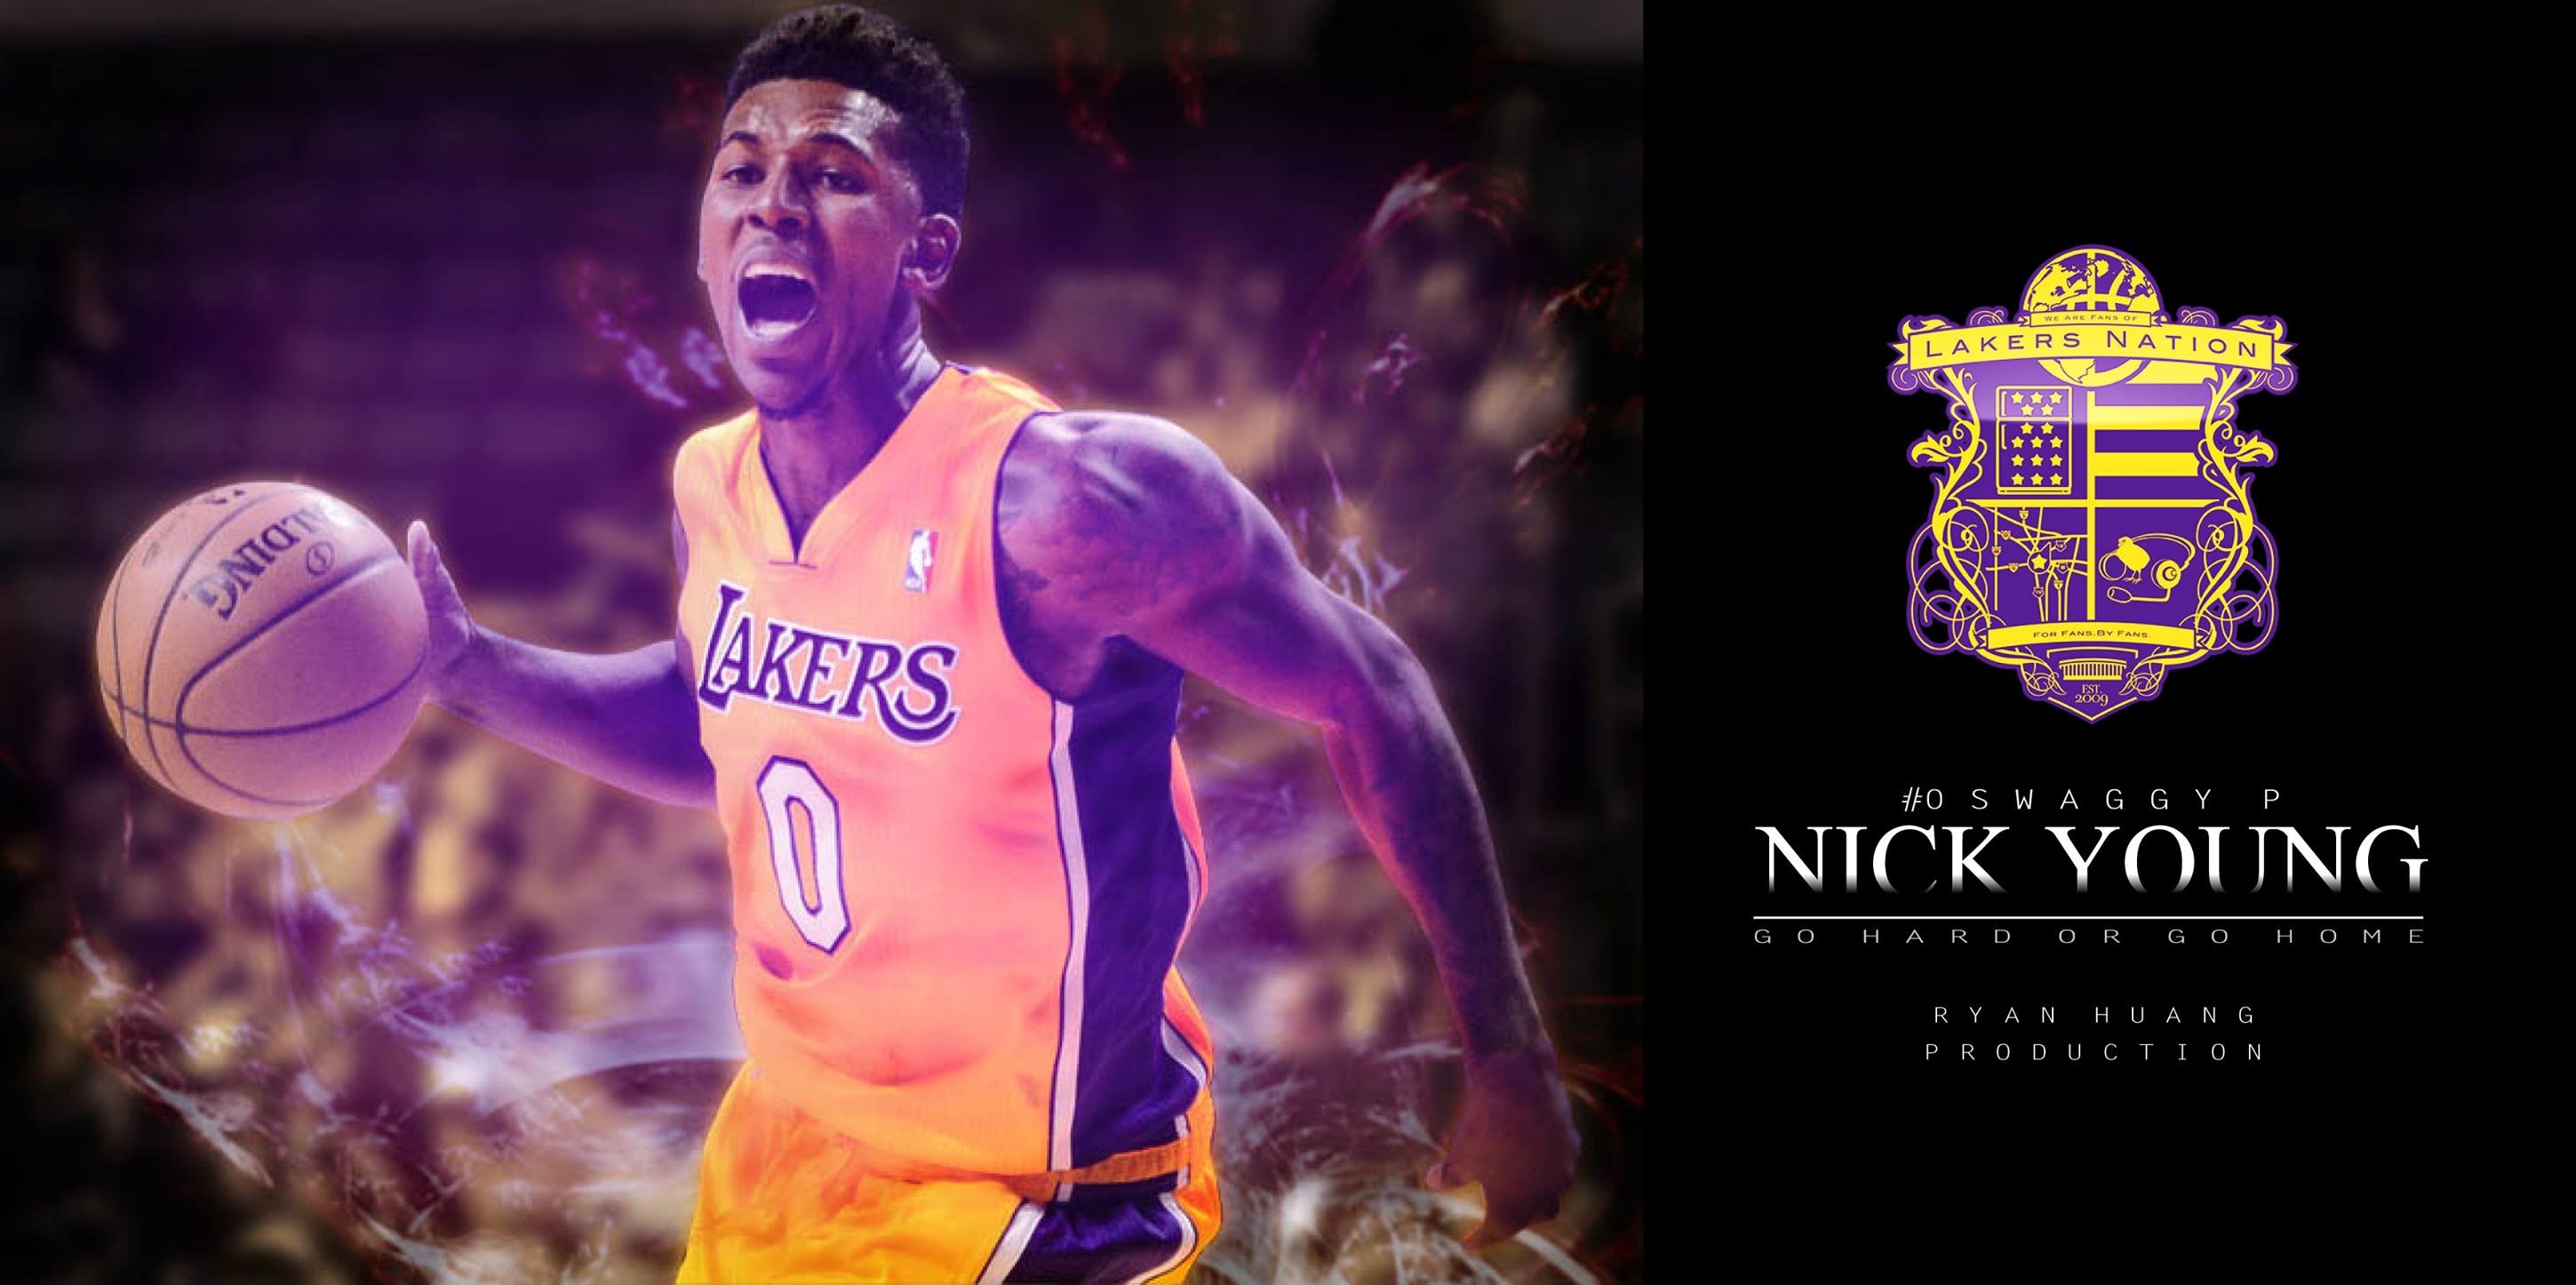 Nick Young Poster by RyanHuang7846 Nick Young Poster by RyanHuang7846